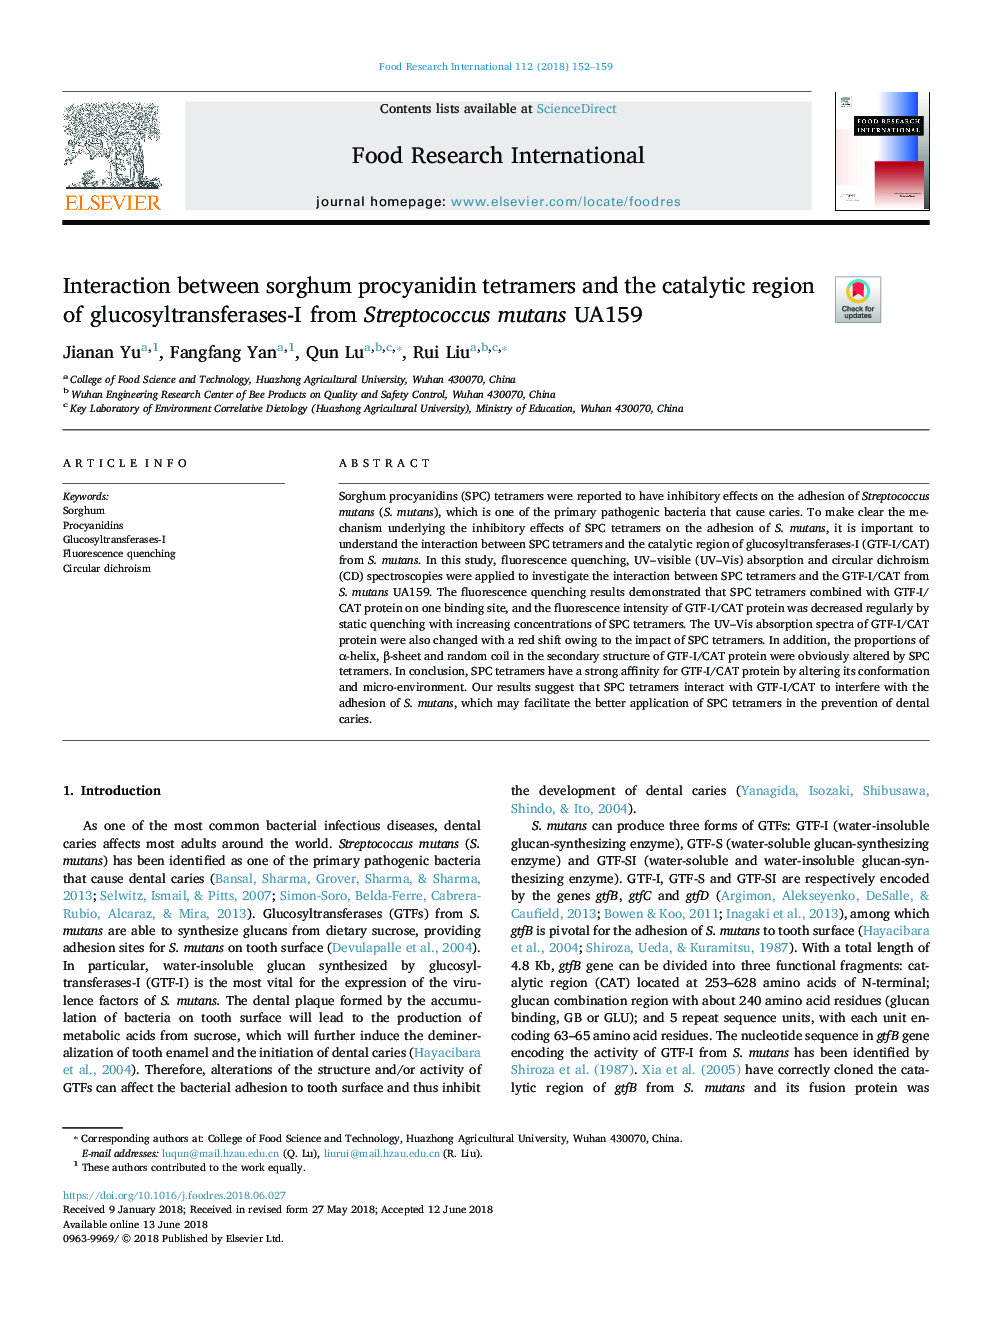 Interaction between sorghum procyanidin tetramers and the catalytic region of glucosyltransferases-I from Streptococcus mutans UA159